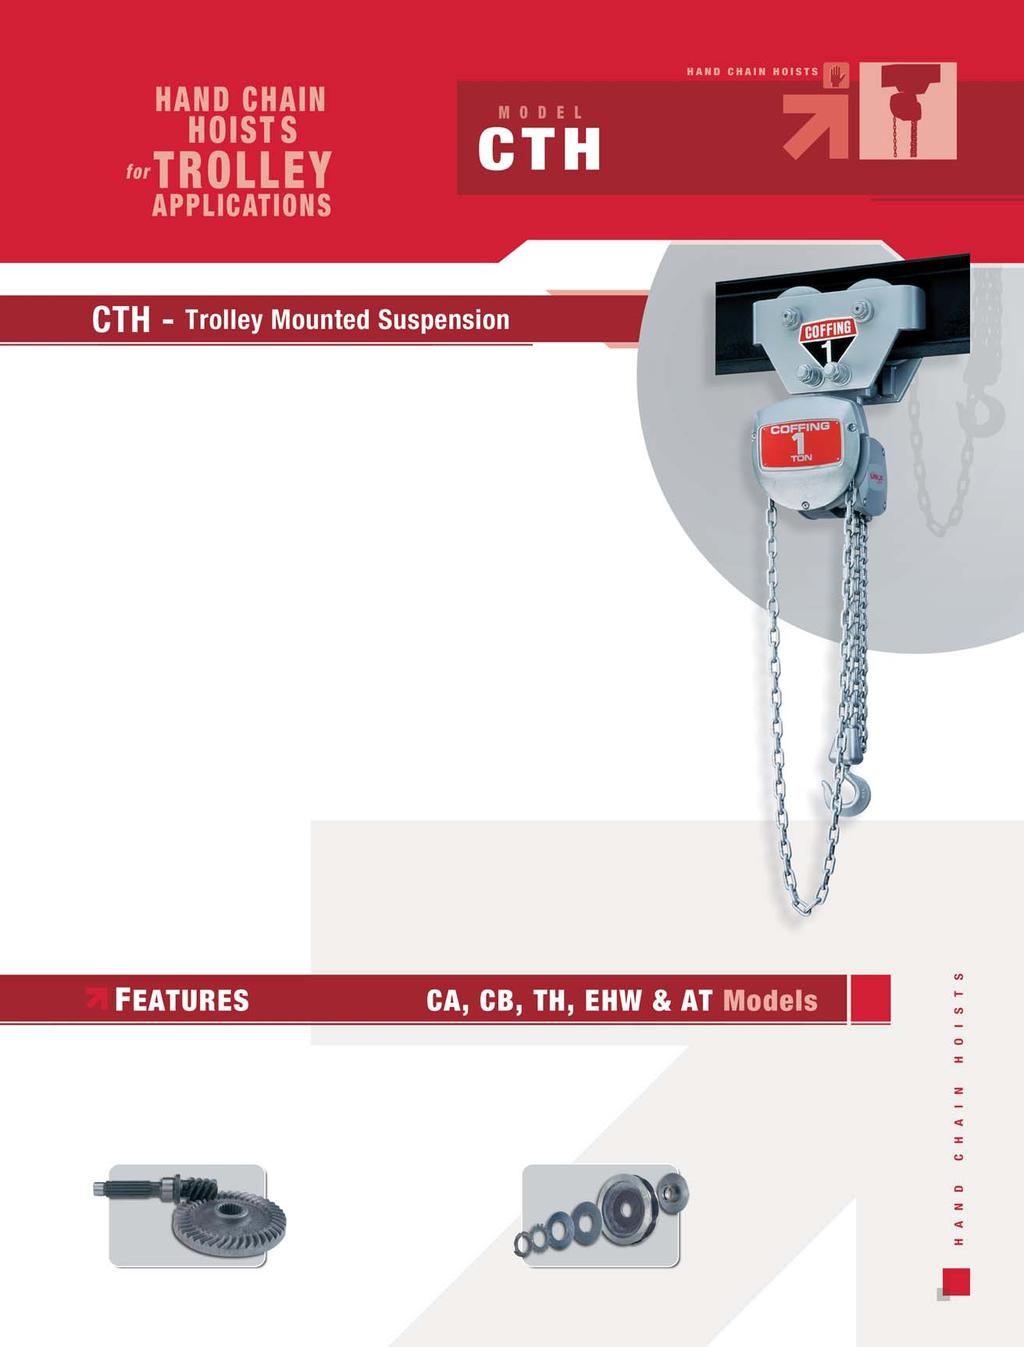 COFFING CTH Models - Featuring a CA or CB hoist integrally mounted to a CT trolley.